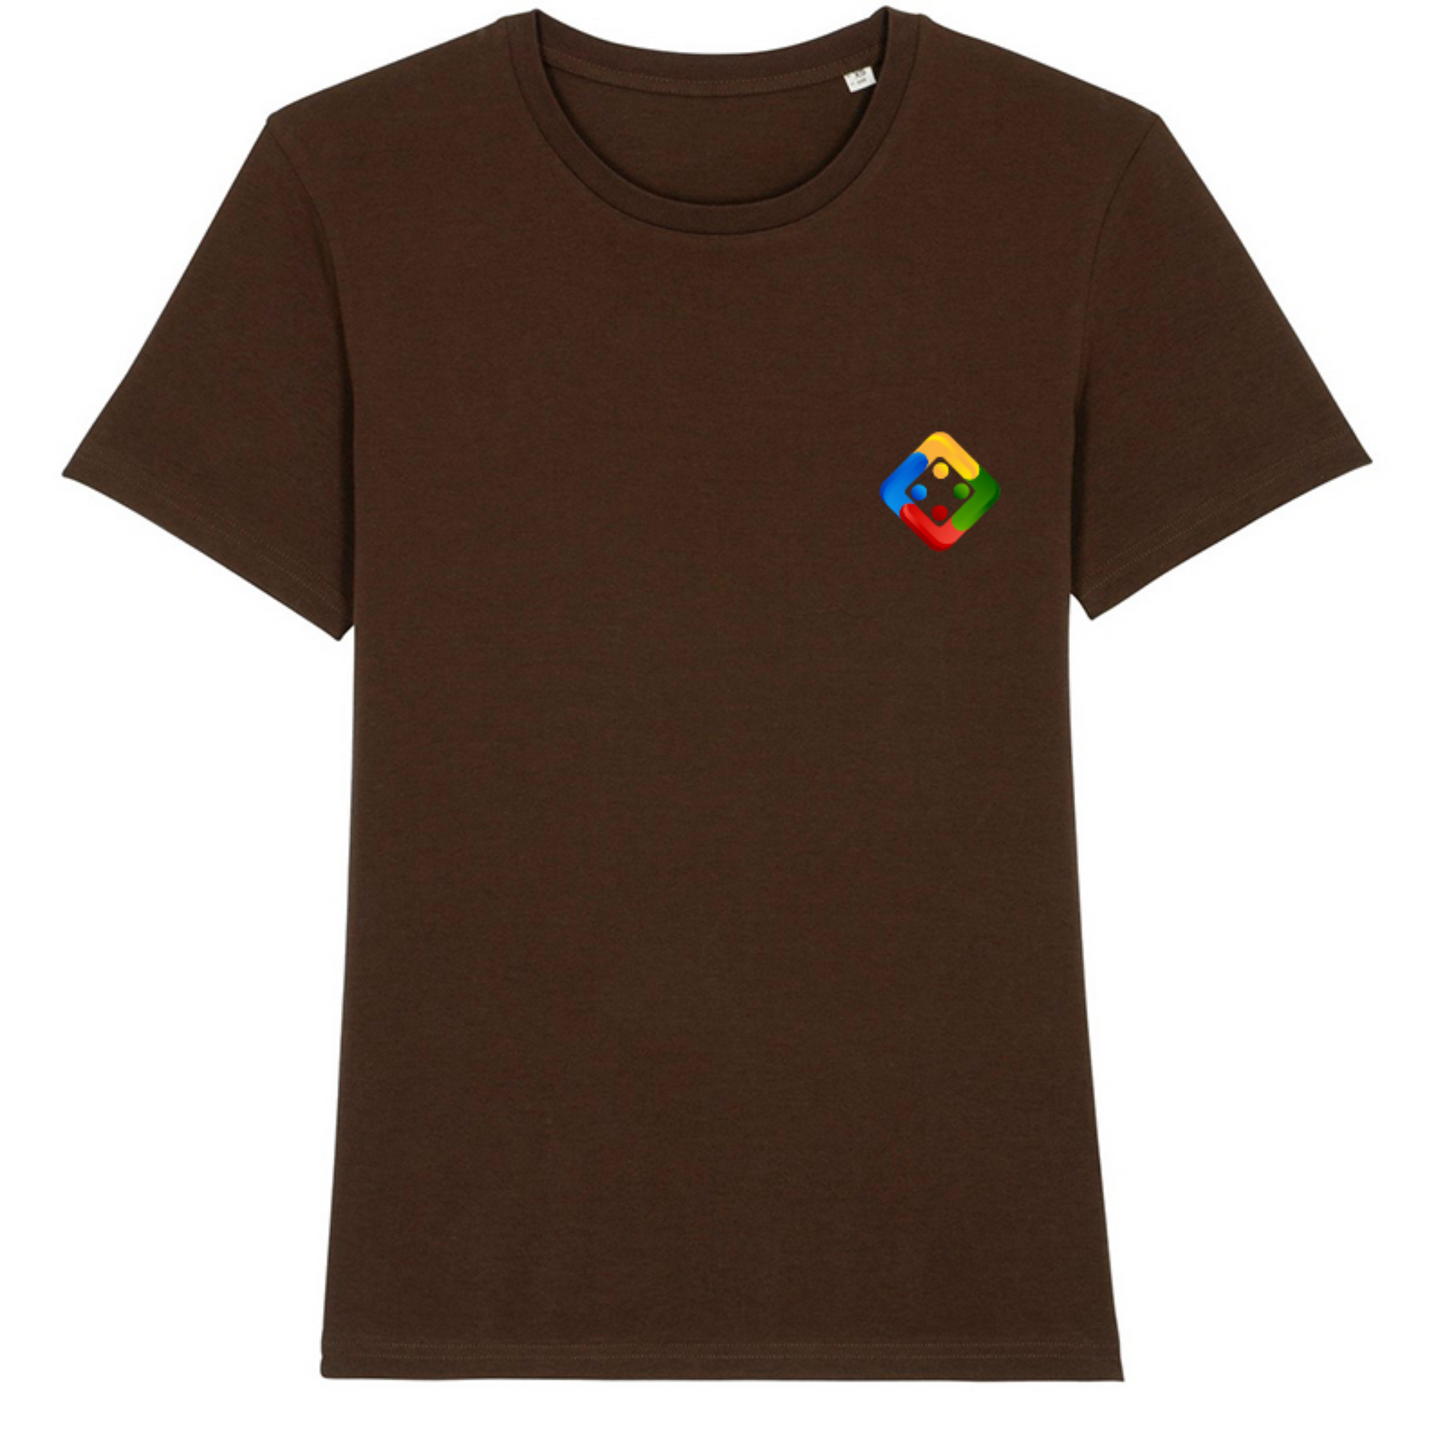 Unisex organic T-shirt in dark colours with embroidered small Uckers emblem. Available in 10 colours.